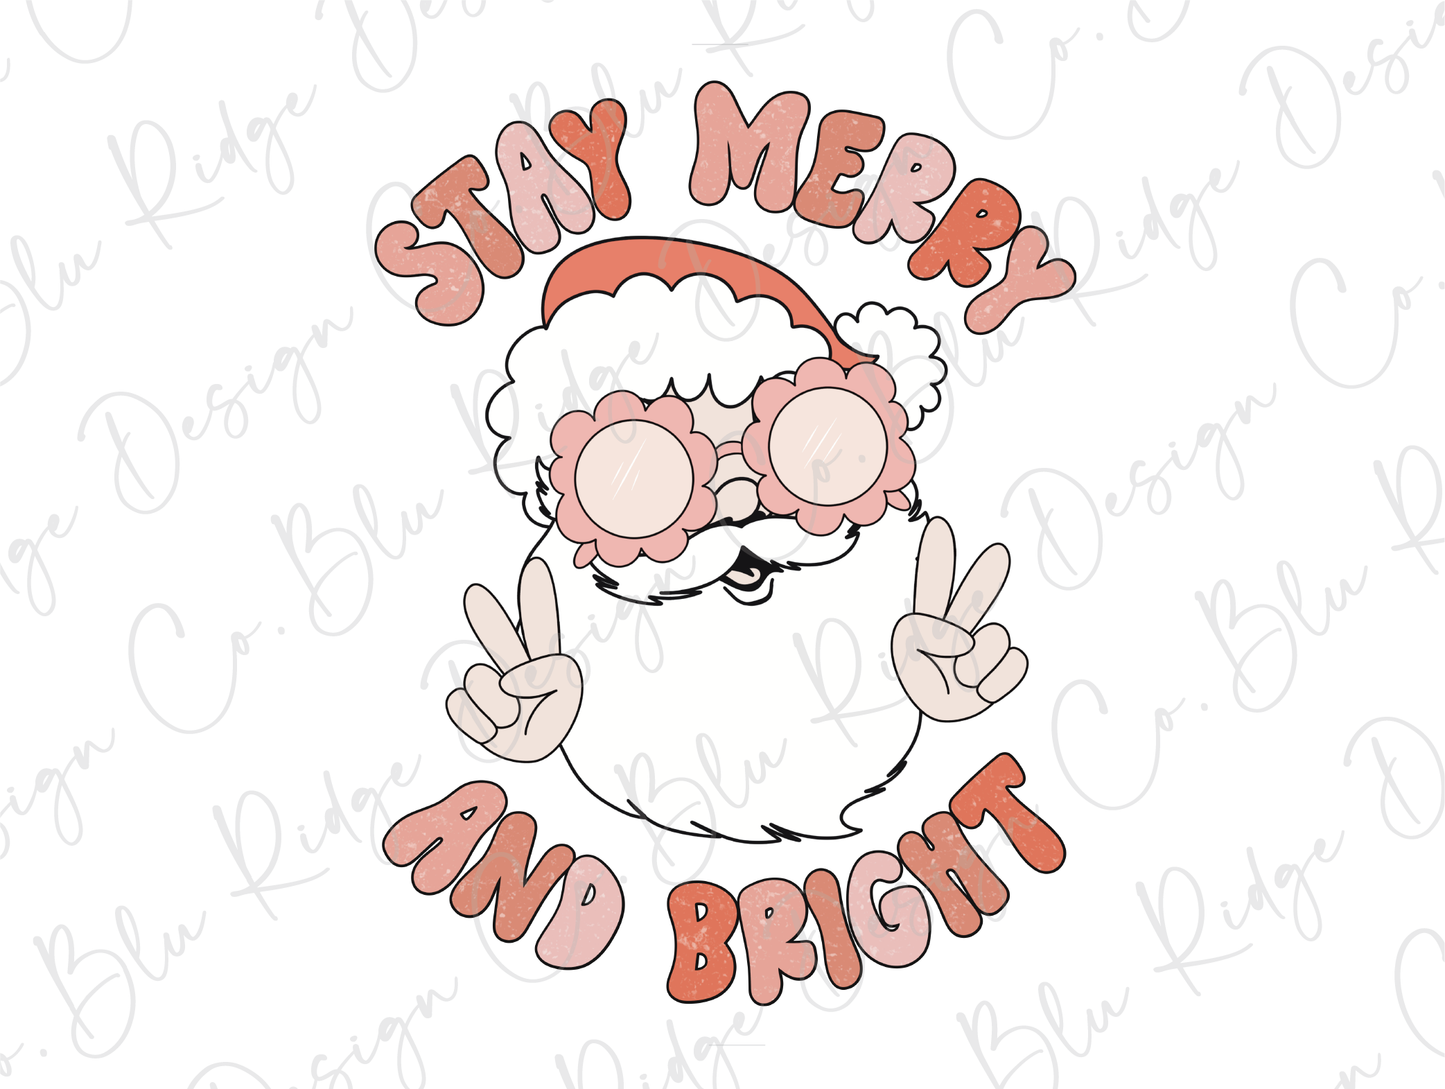 Stay Merry and Bright Retro Santa Claus Peace Sunglasses Direct to Film (DTF) Transfer